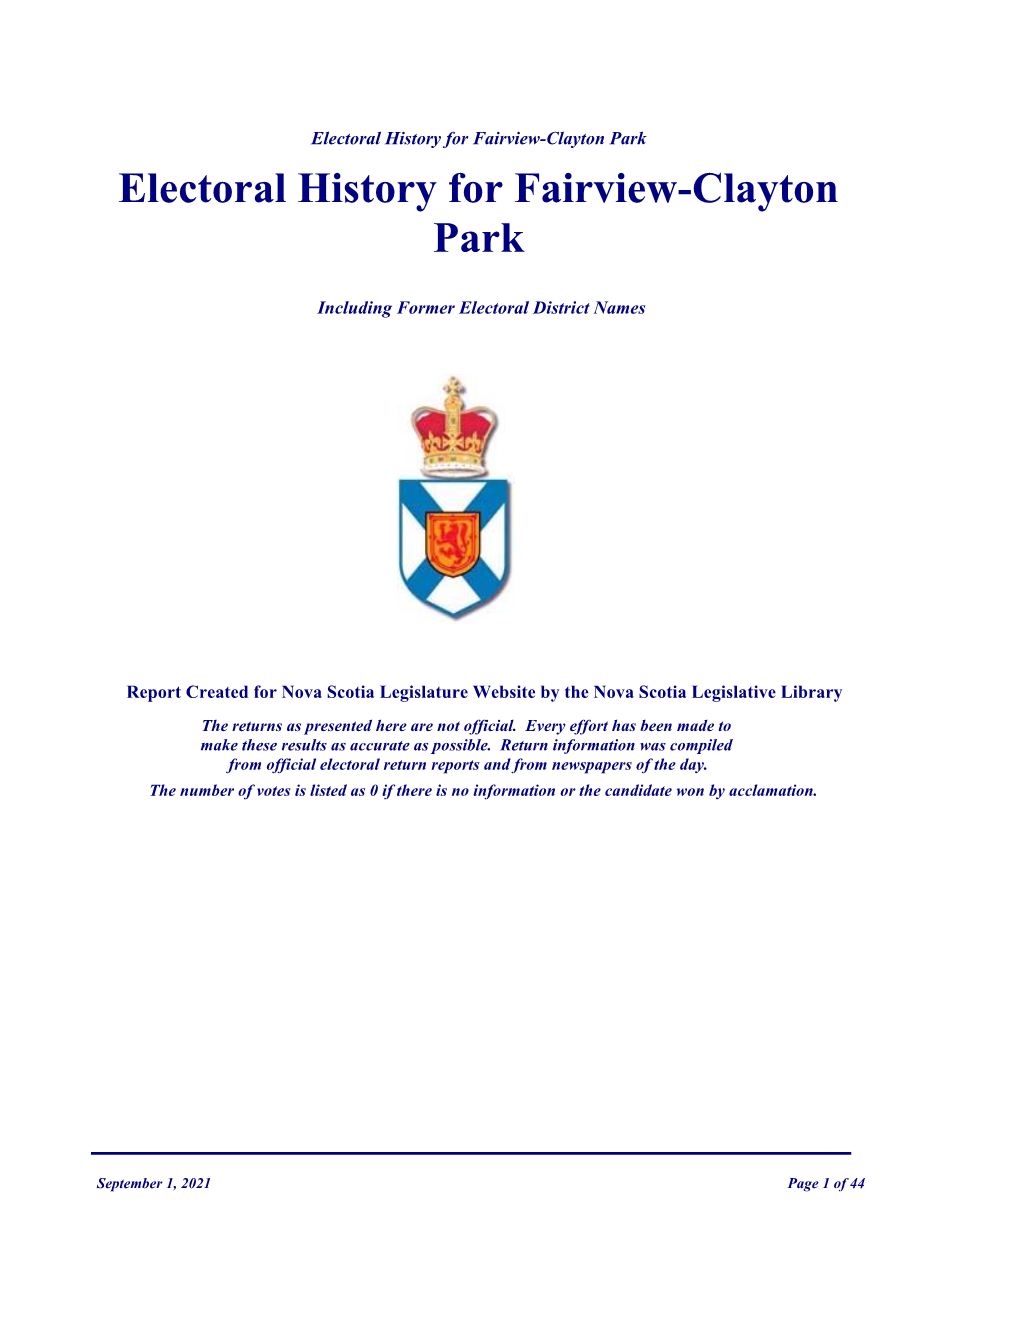 Fairview-Clayton Park Electoral History for Fairview-Clayton Park